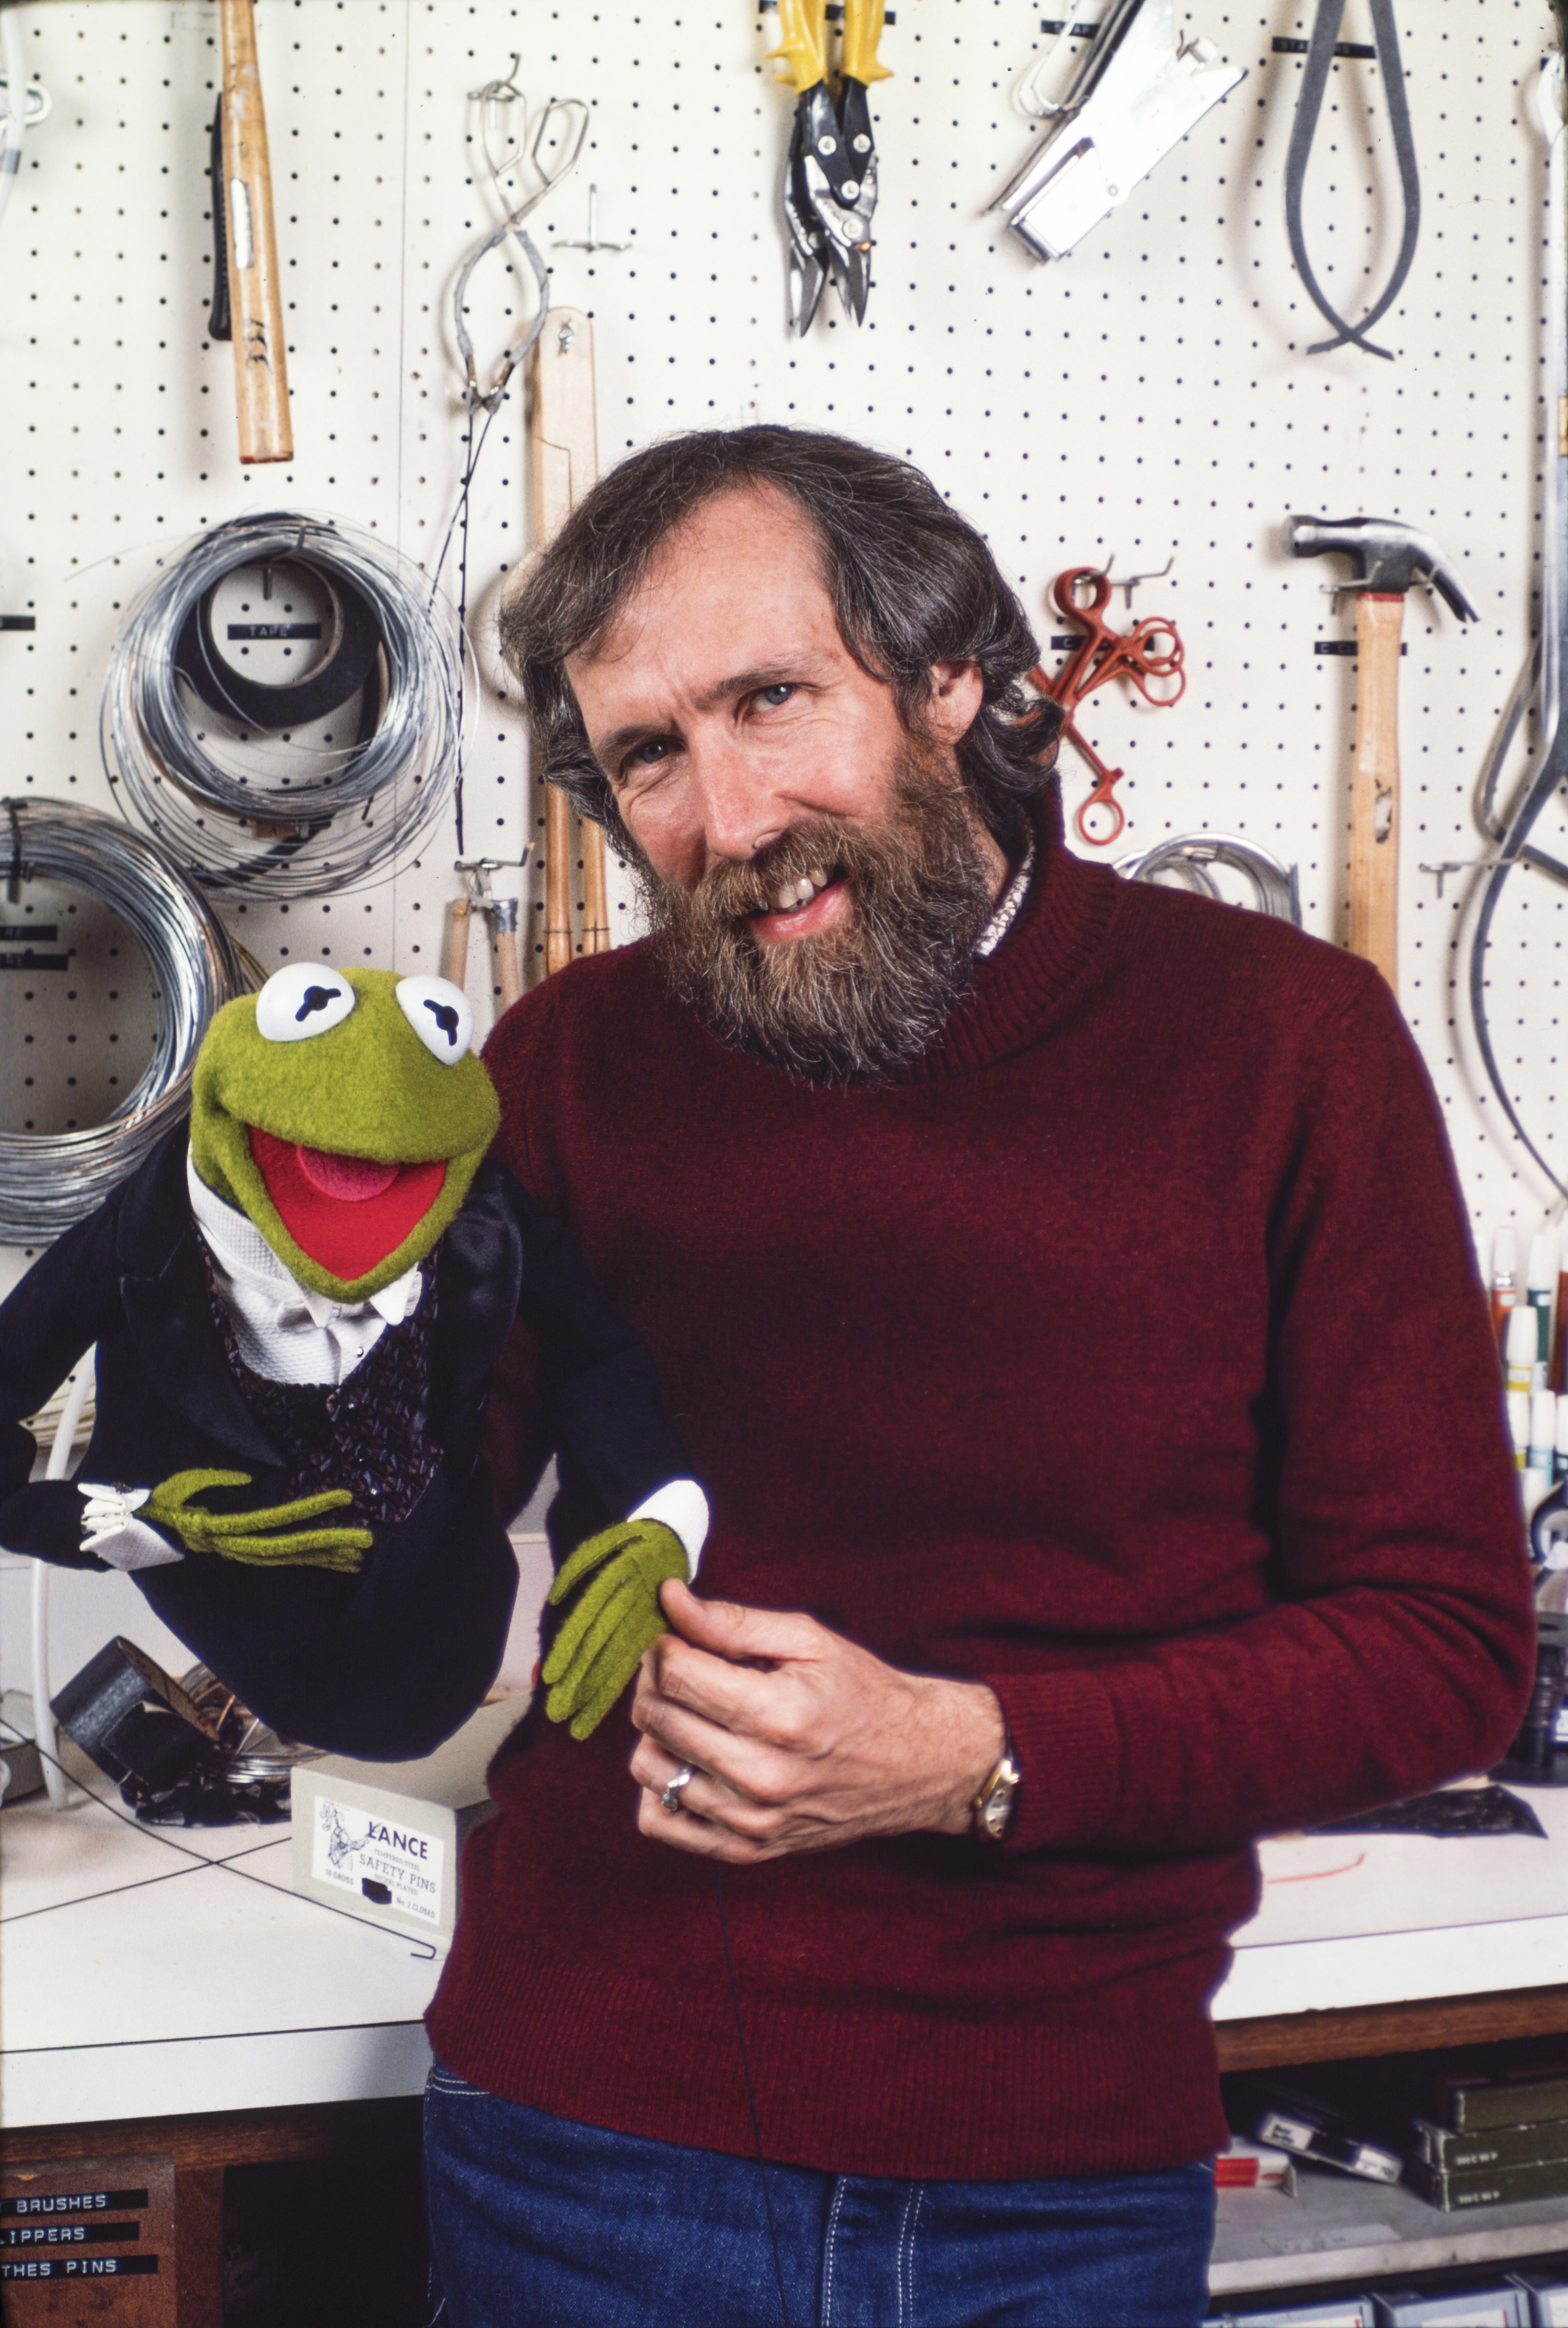 Jim Henson holds a muppet with his right hand while he poses in front of a toolshop.